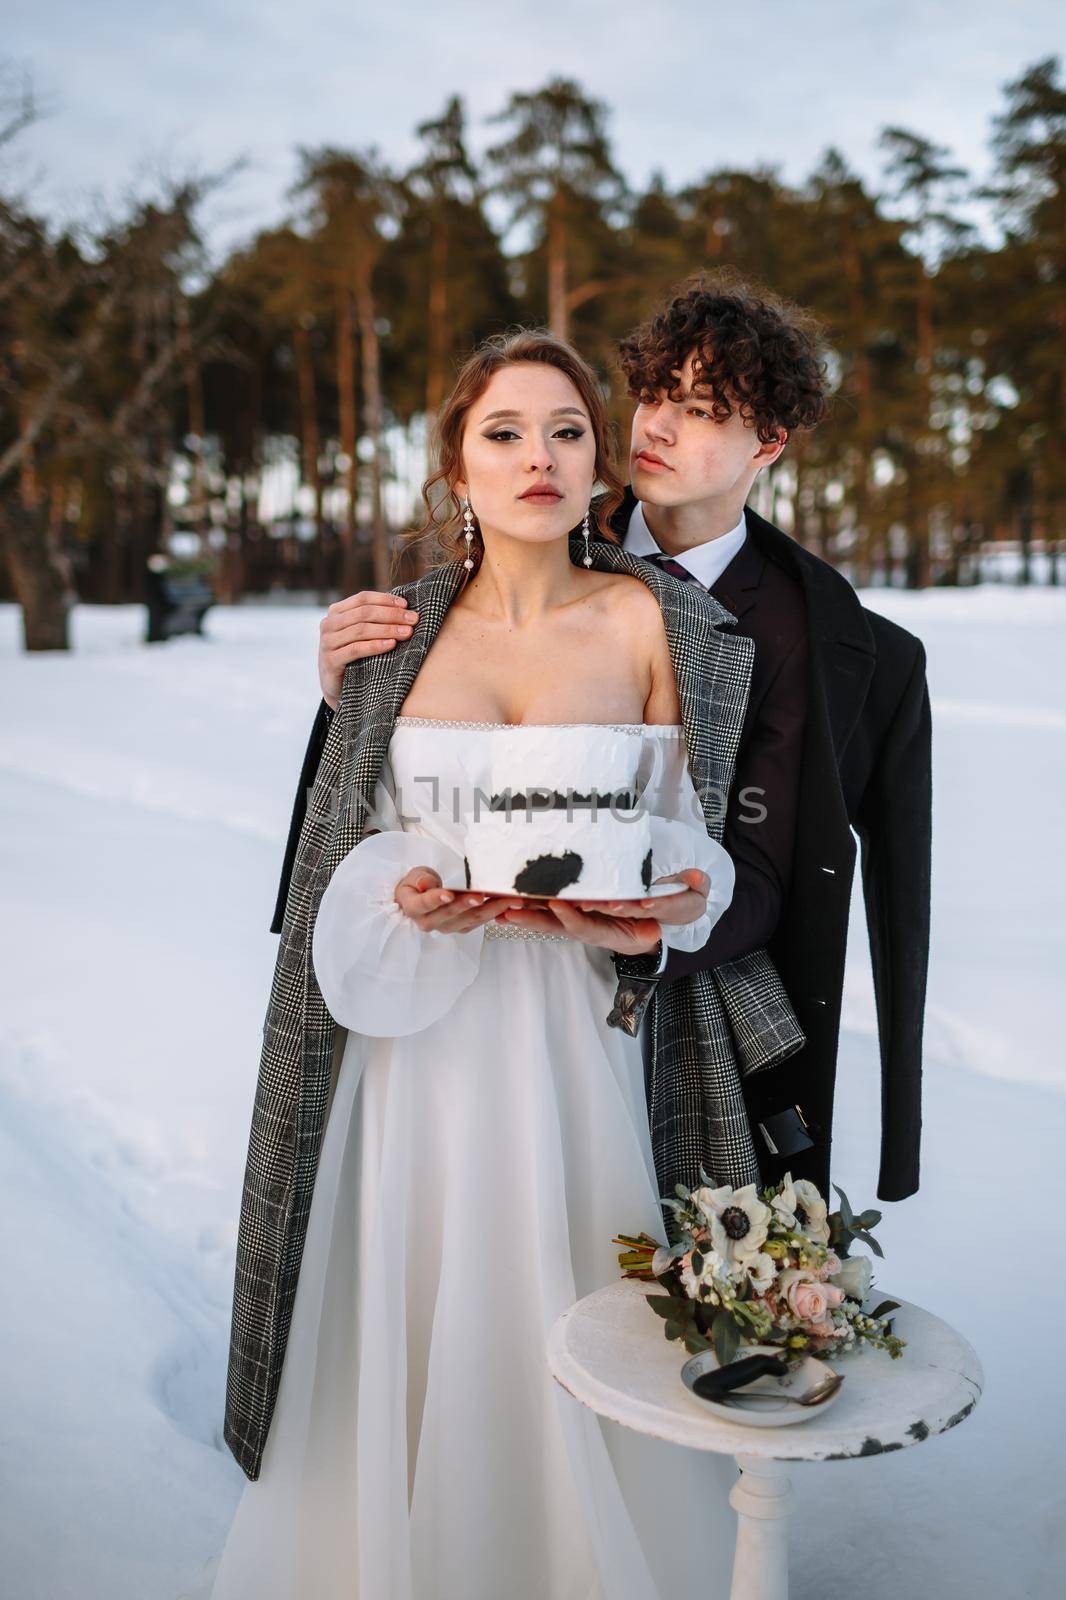 The bride and groom hold a wedding cake in their hands, standing in the snow in the forest.